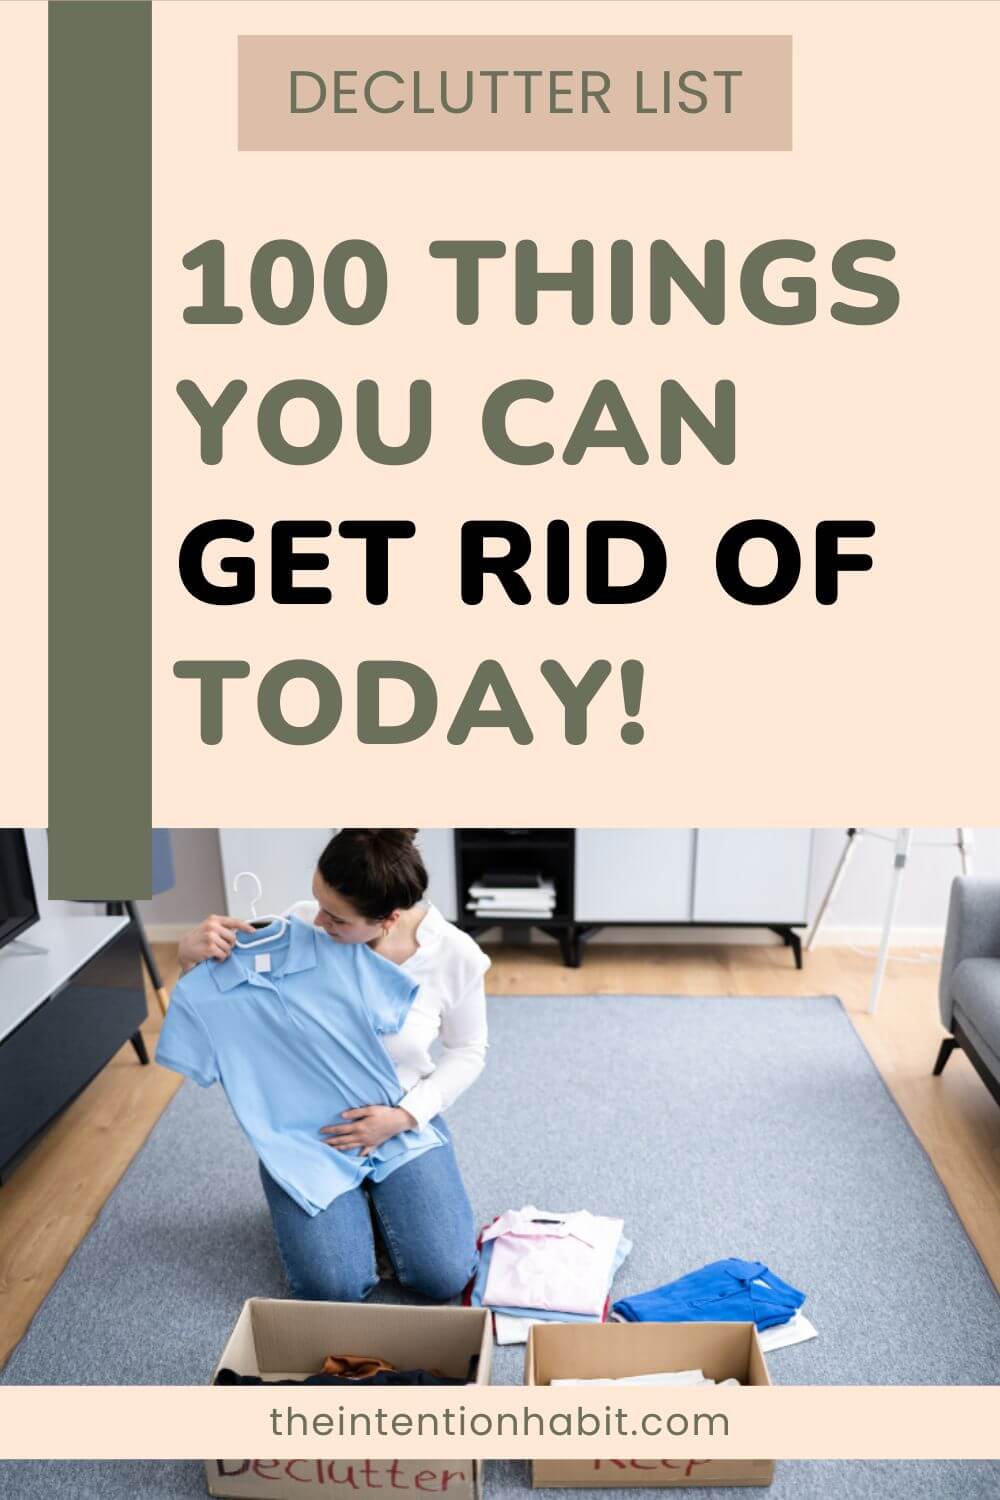 100 things to get rid of today